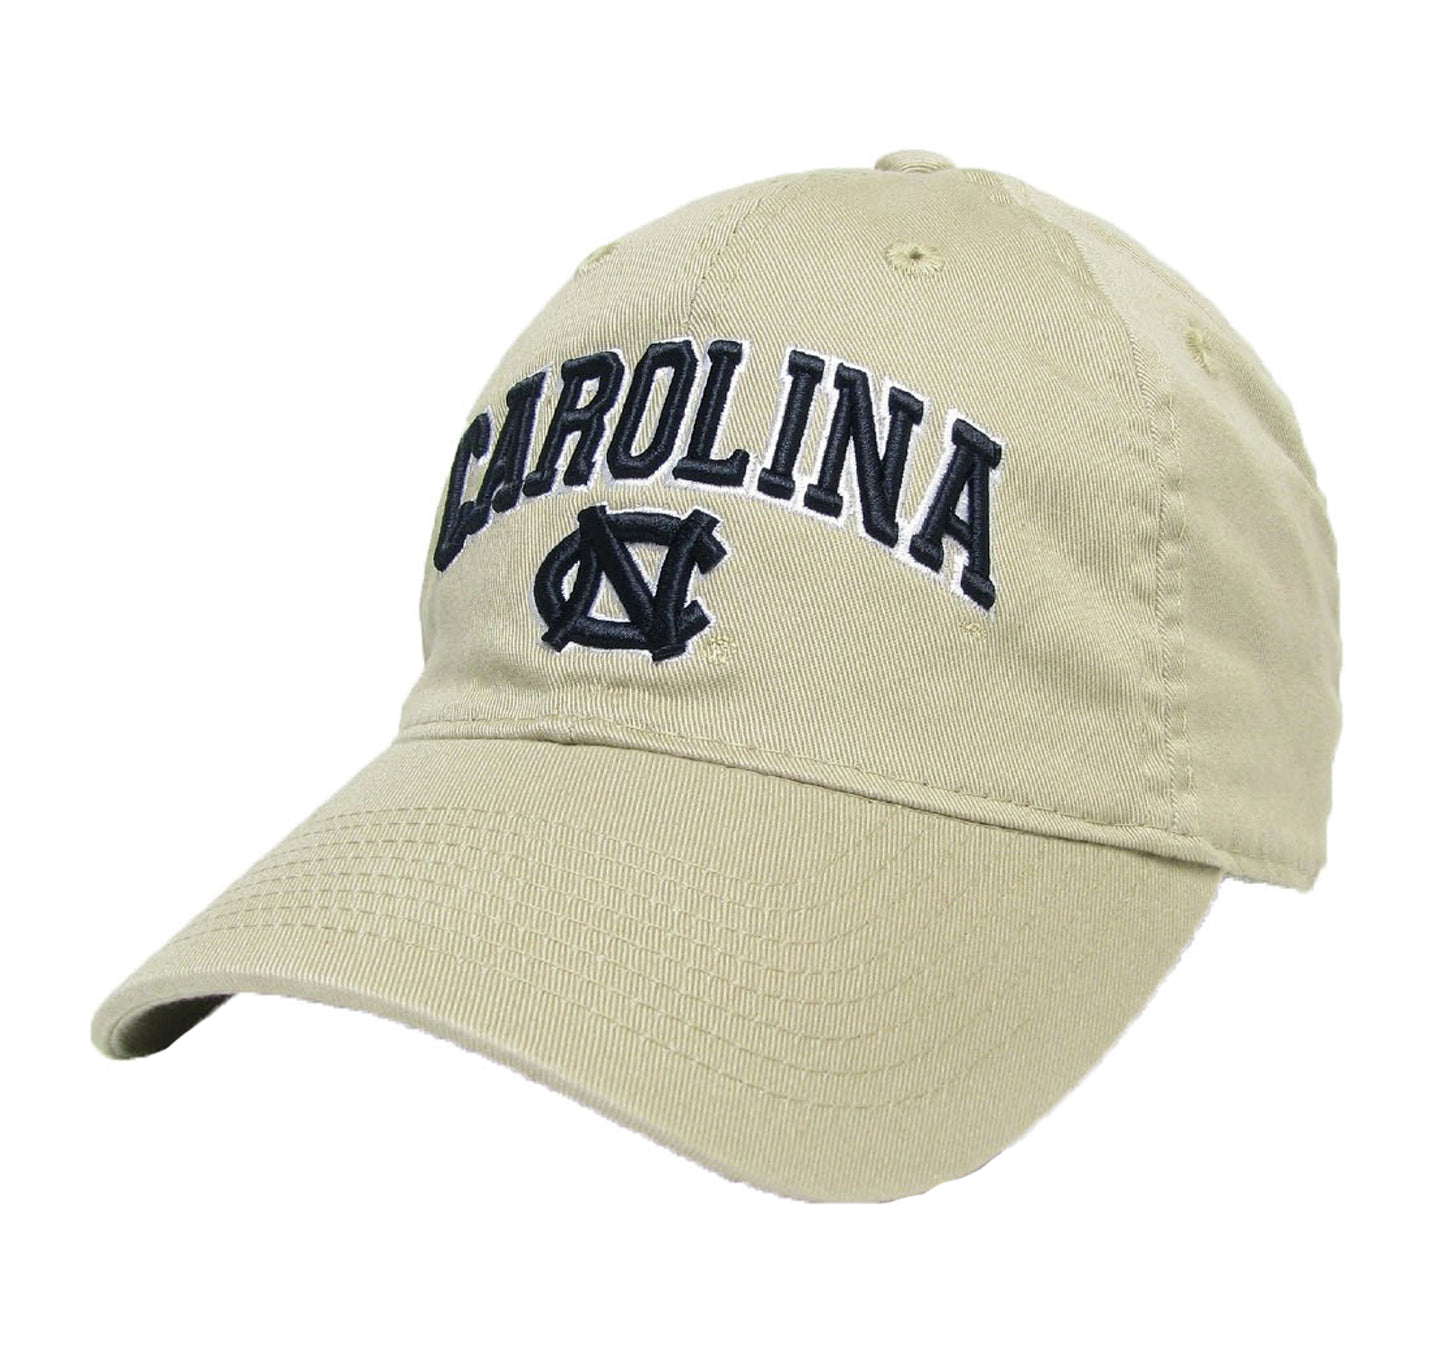 UNC Hat in Khaki with Embroidered Main Event Carolina Tar Heels Logo